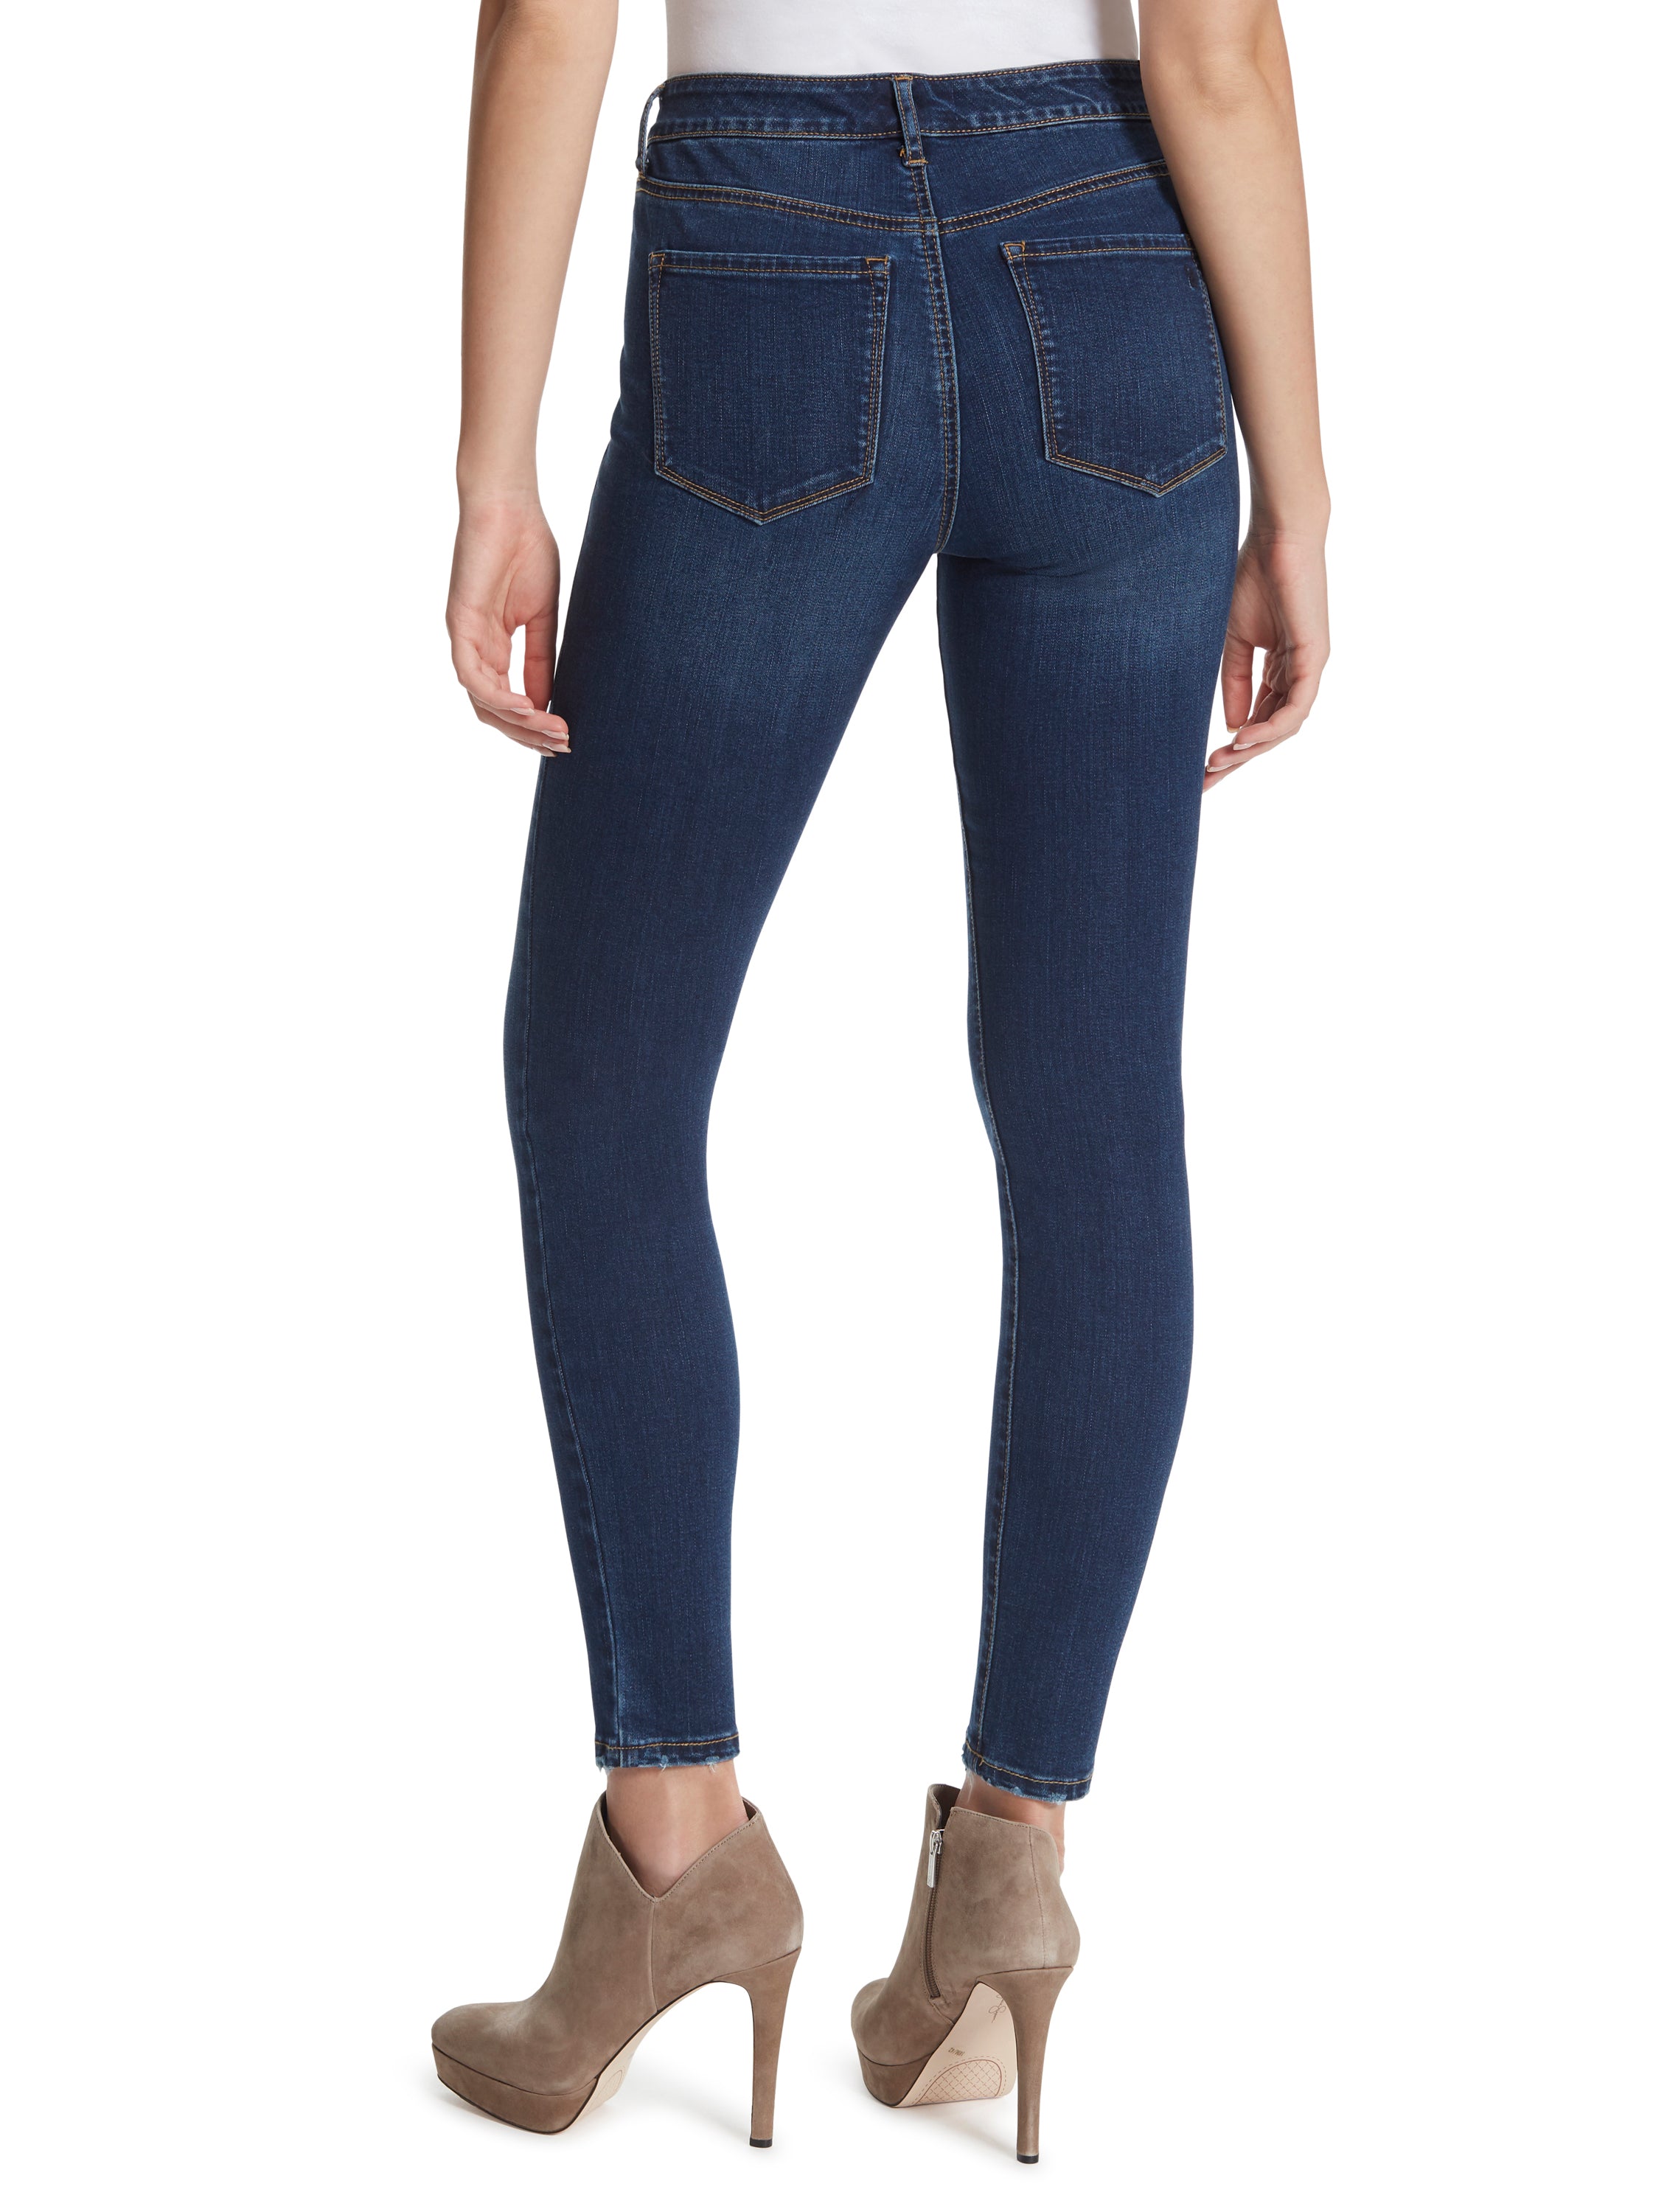 Adored High Rise Ankle Skinny Jeans in Mia – Jessica Simpson